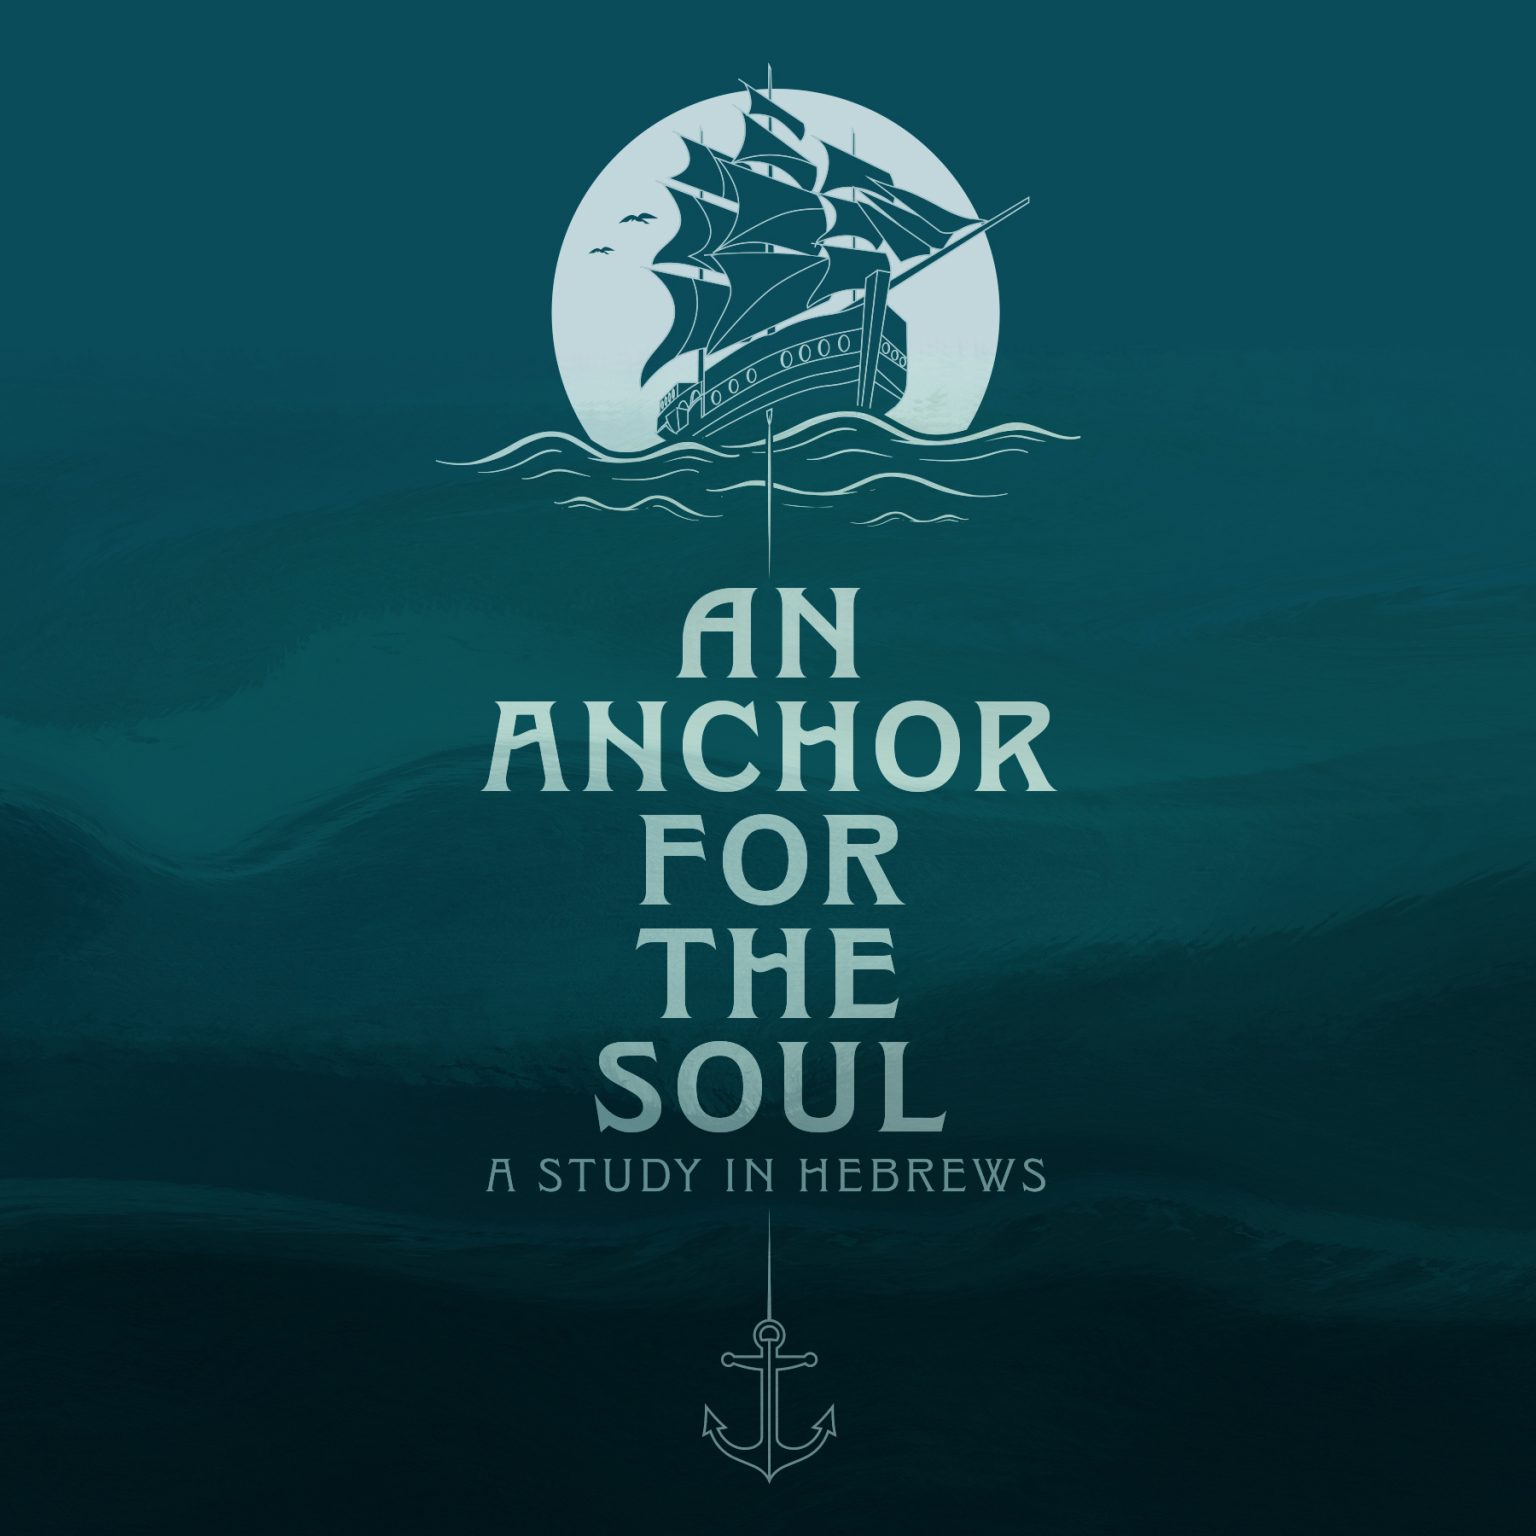 An Anchor for the Soul: A Study in Hebrews